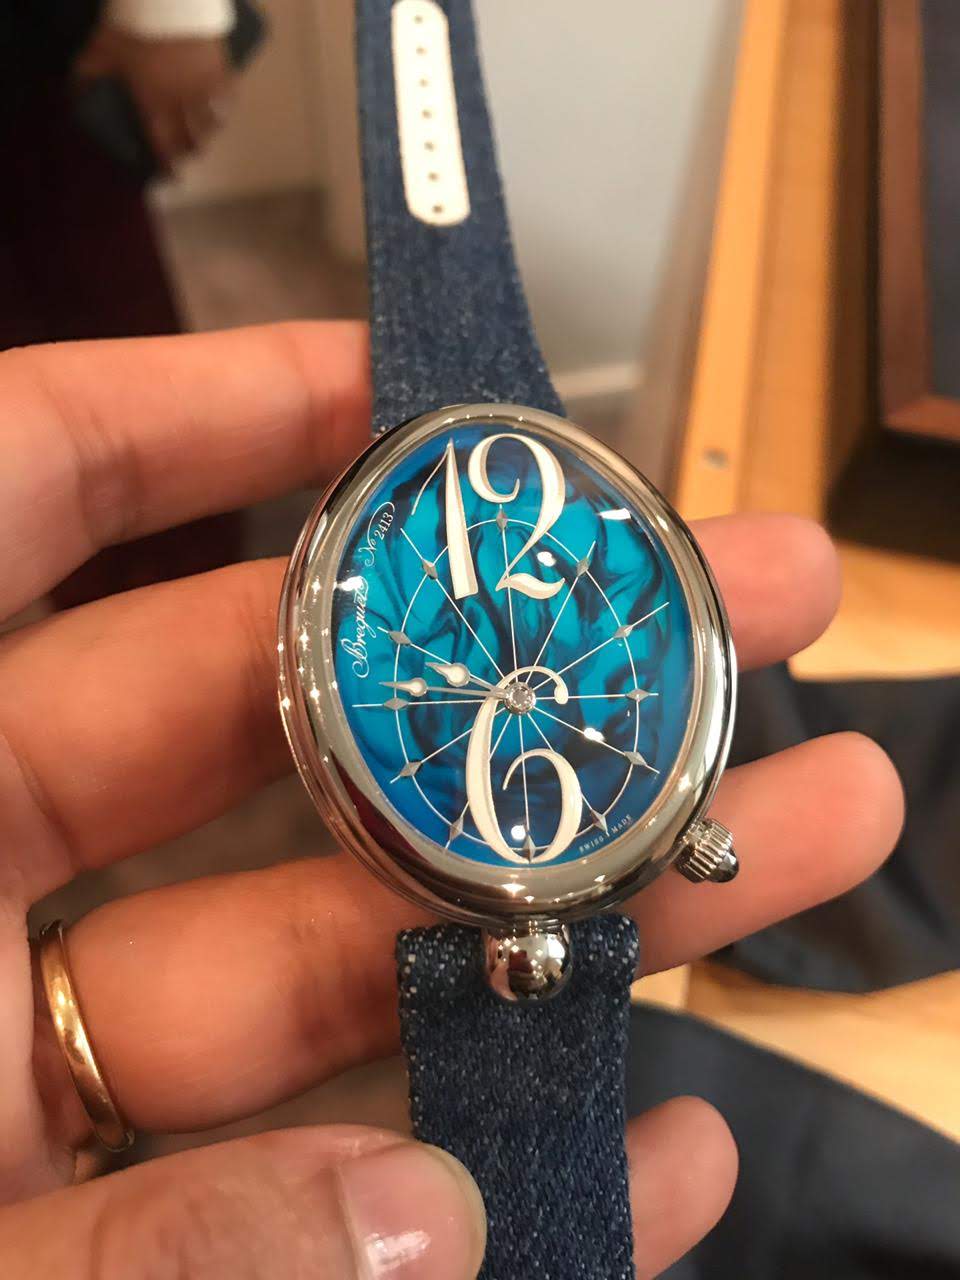 Two new pieces join the Reine de Naples family. This one comes in a deep-blue lacquer with turquoise blue scrolls. This unique dial was achieved by placing a touch of clear lacquer on still liquid dark material and then combined. The colours mix automatically to form a new design each time. 